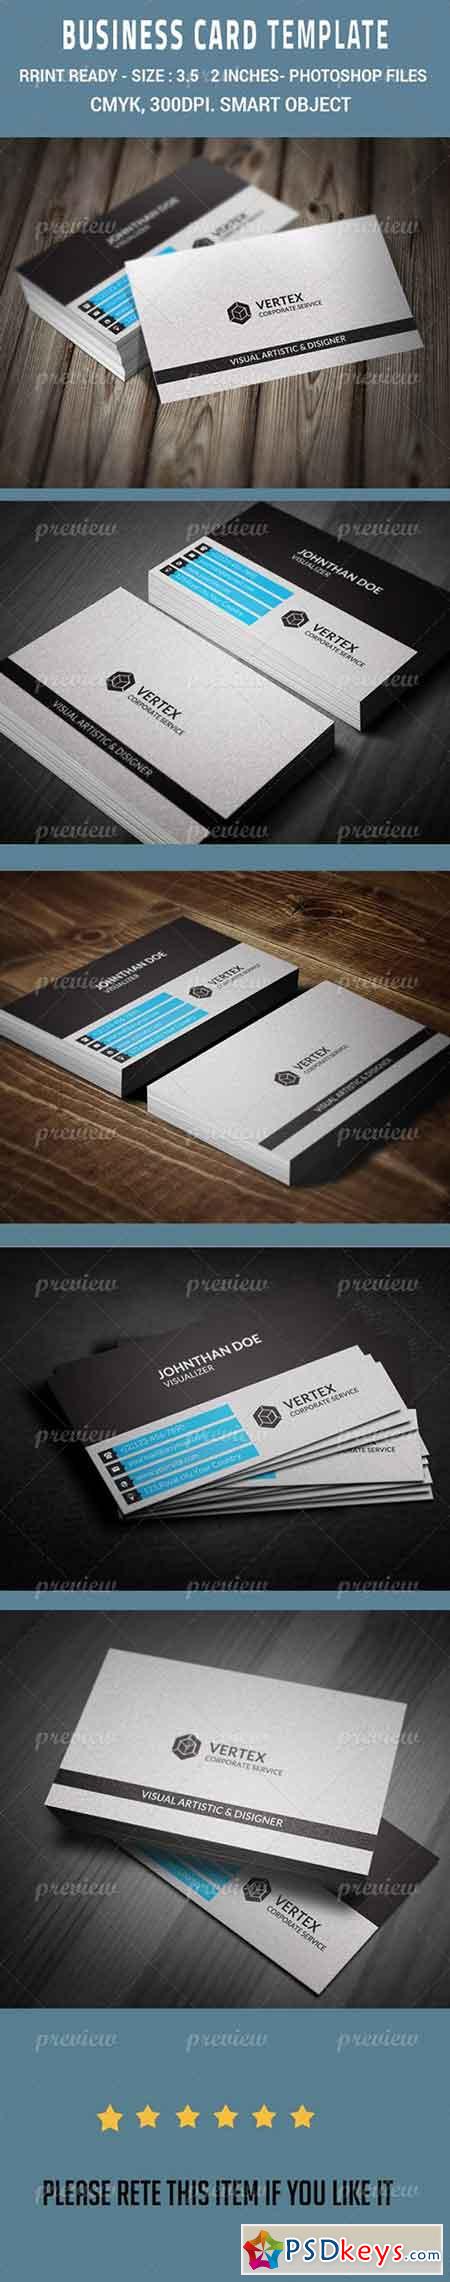 Clean Corporate Business Card 2 3971